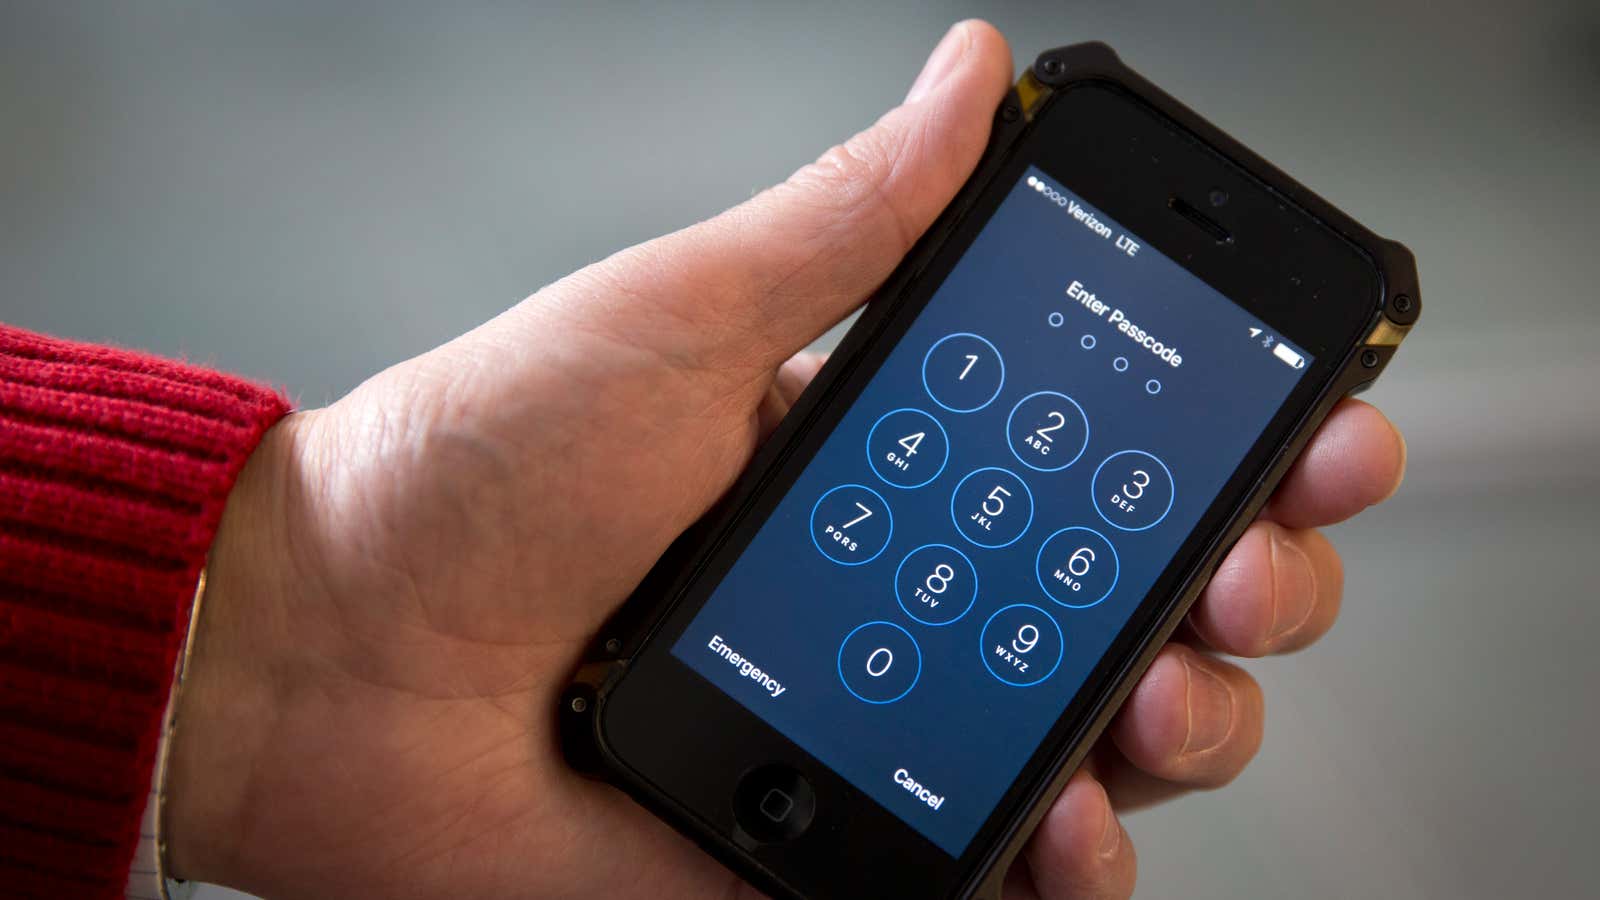 Apple’s refusal to help the FBI could lead to privacy policies it likes even less.